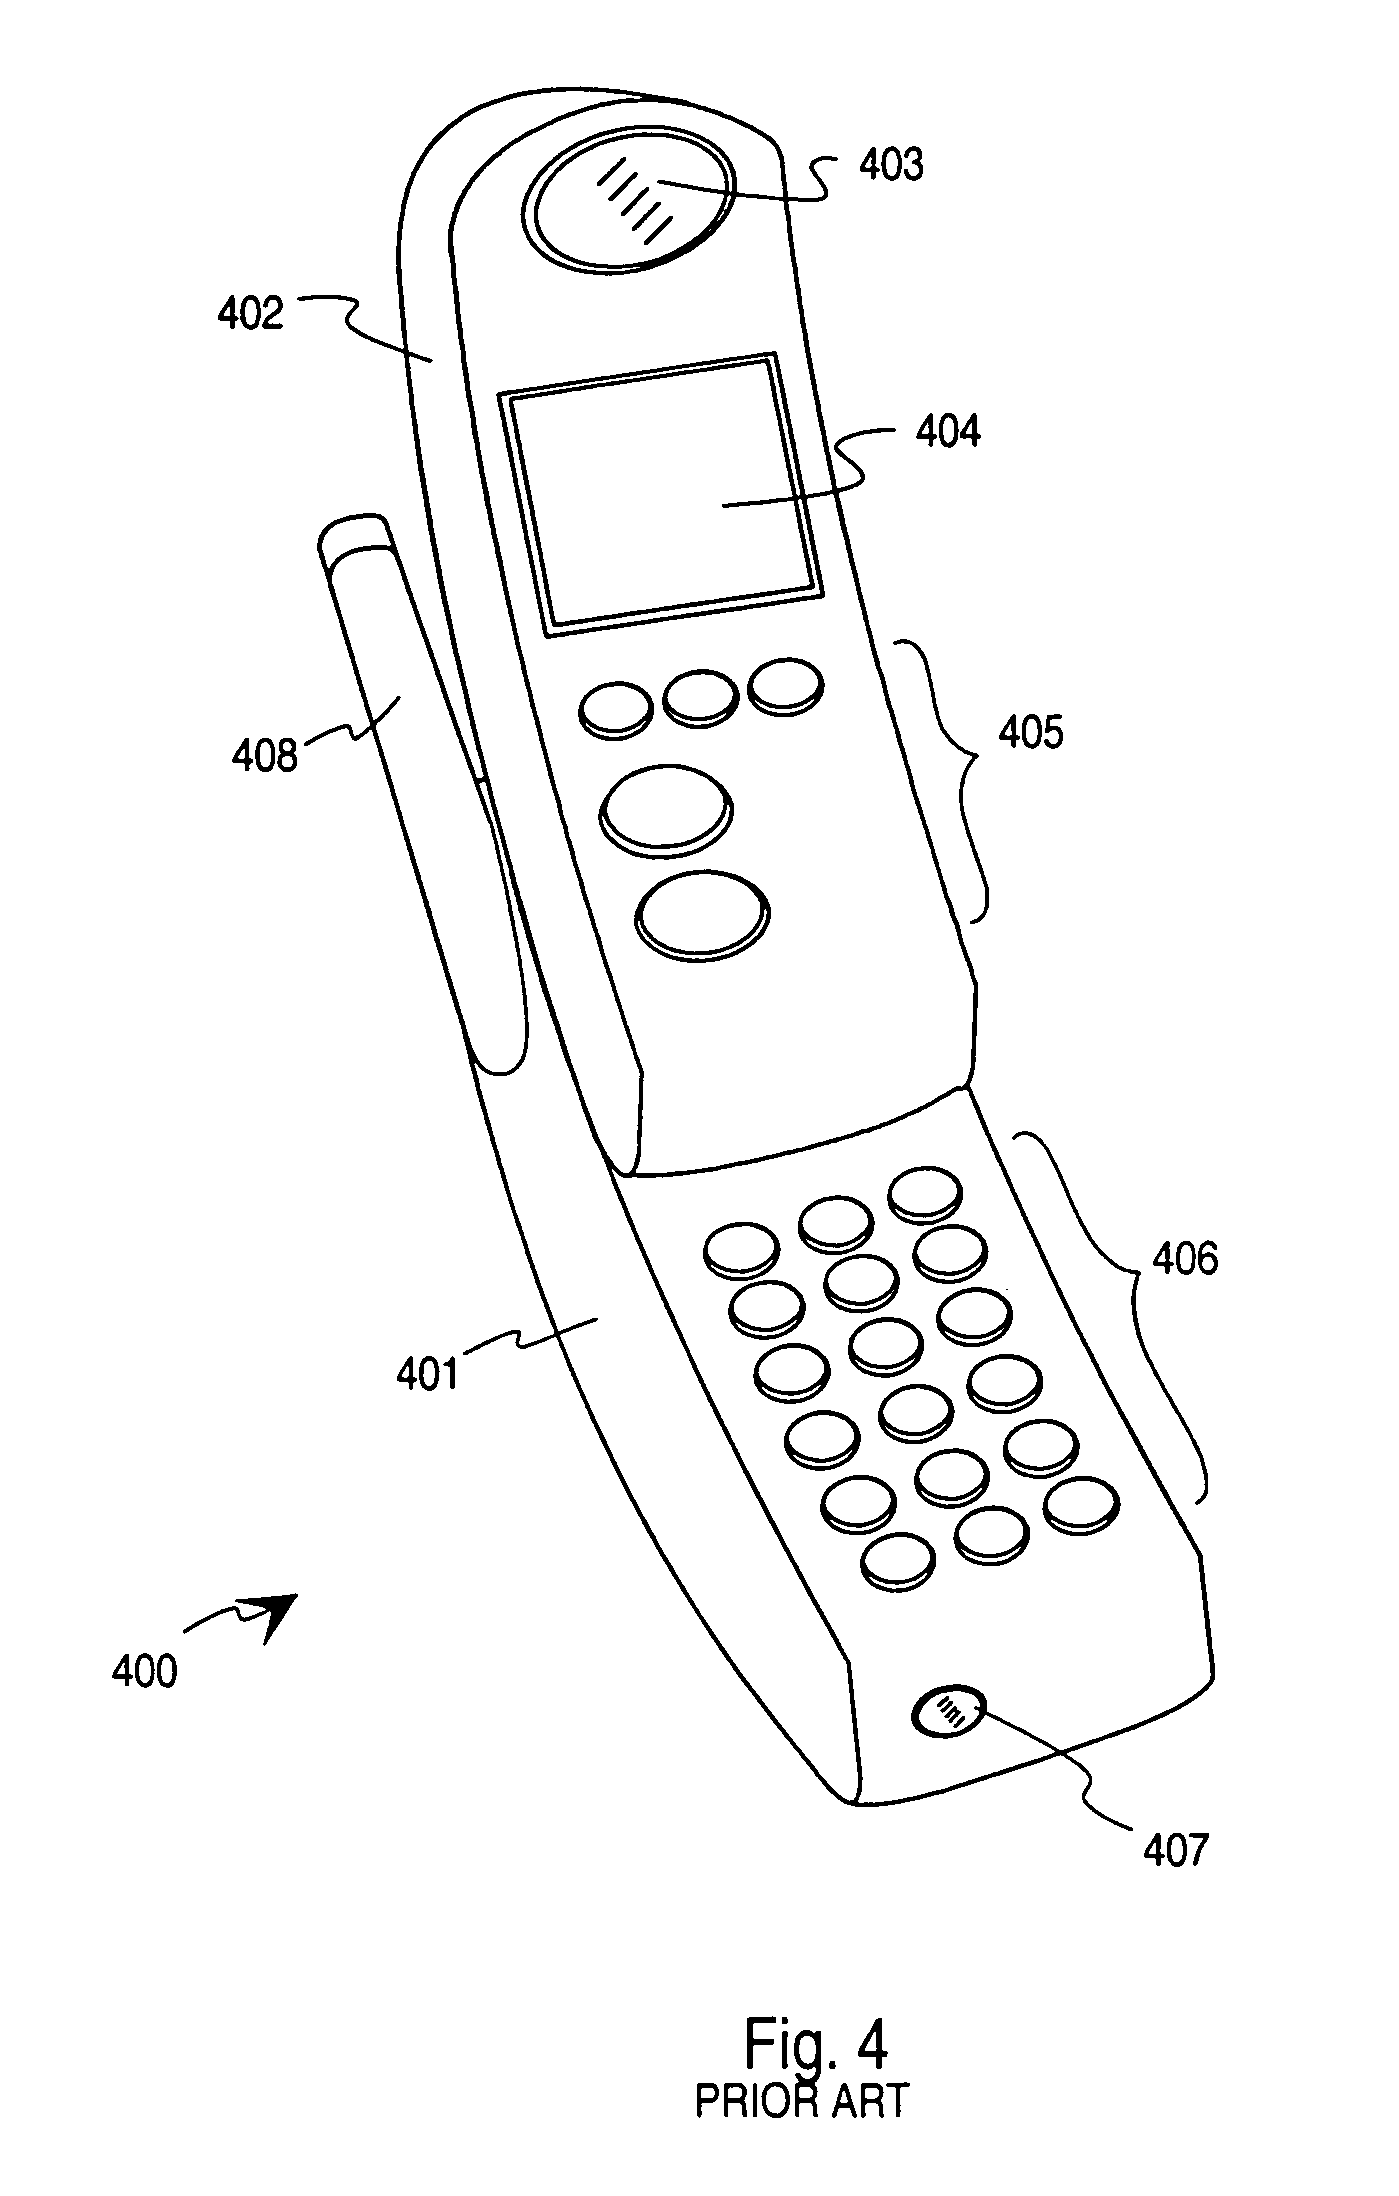 Telescopic structure for a telephone apparatus